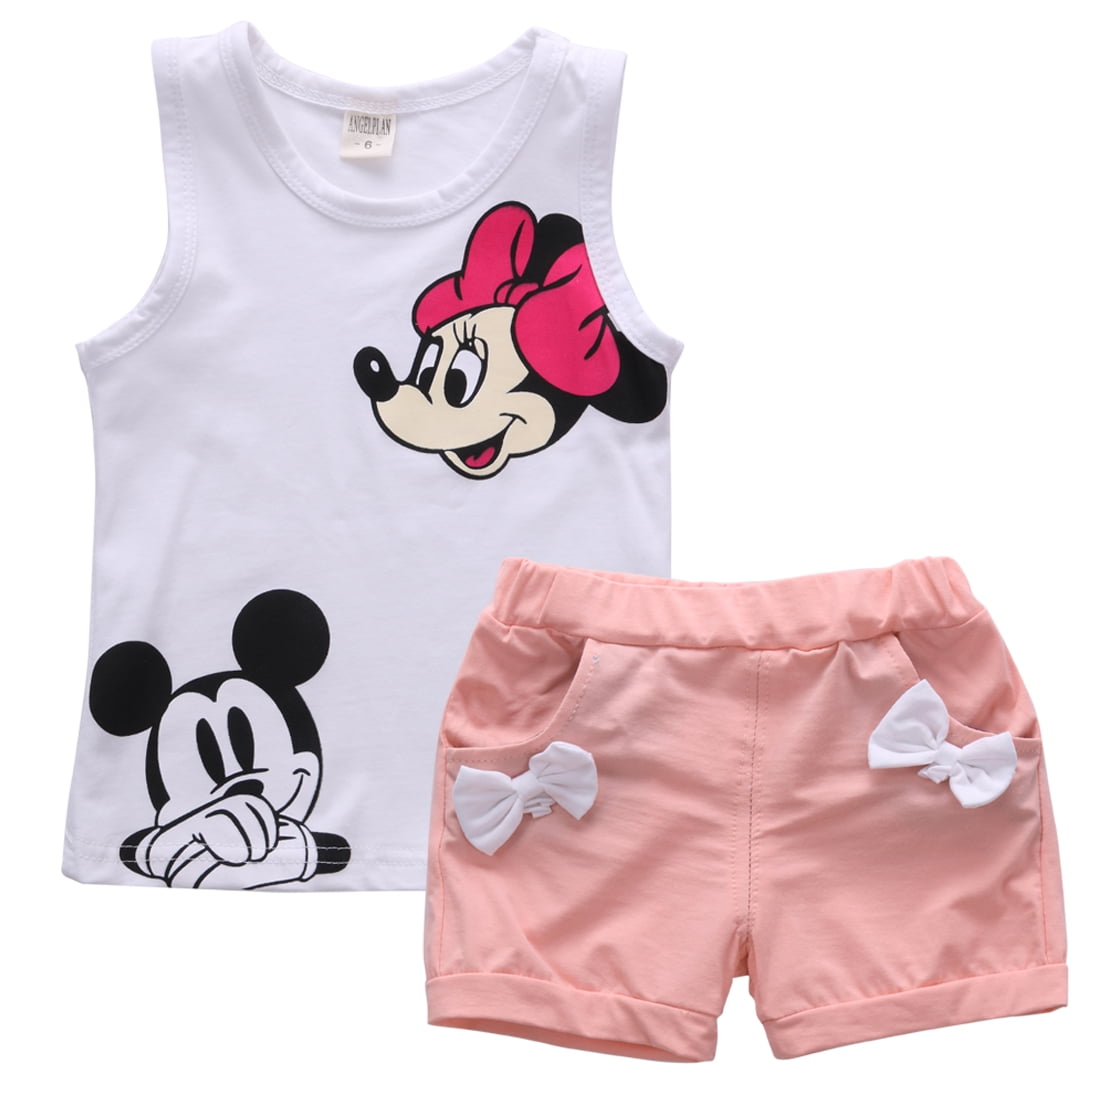 2pcs New Baby Kid Toddler Girl Minnie Mouse Outfit Clothes Set T-shirt Top+Pants